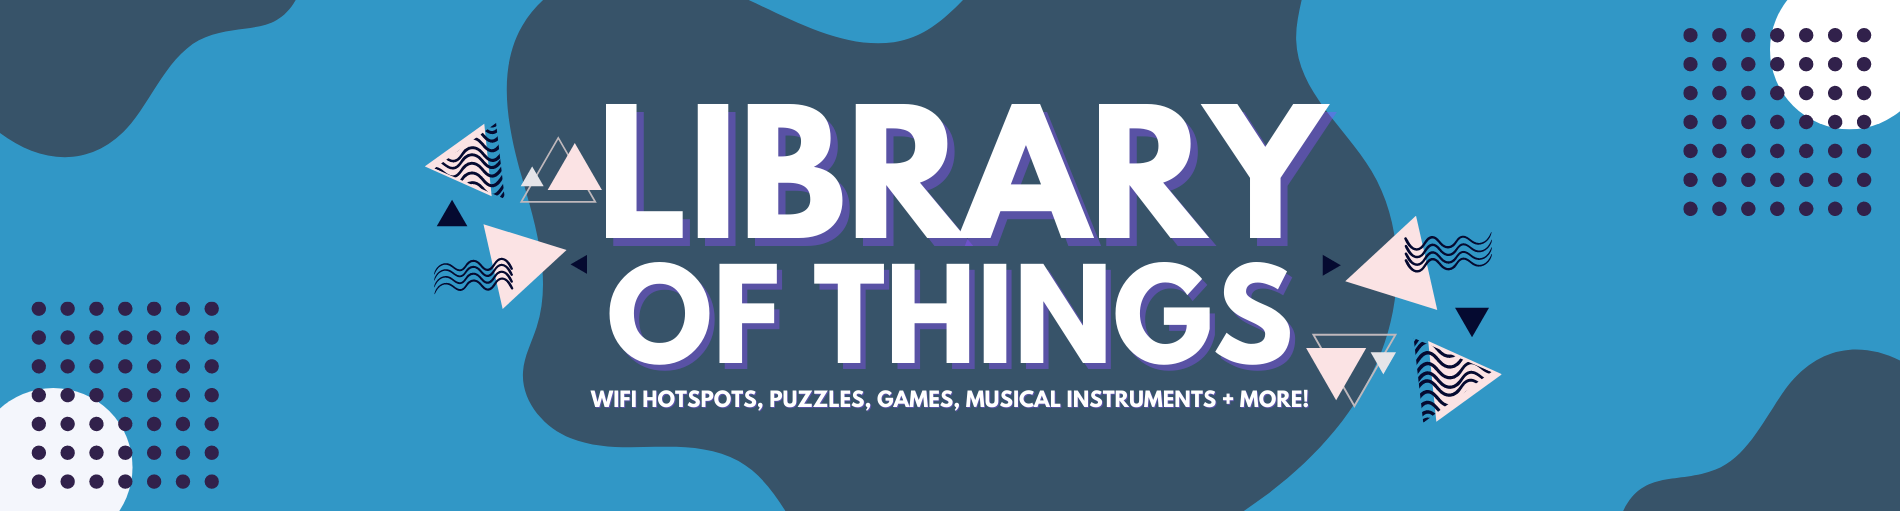 LIBRARY OF THINGS web graphic